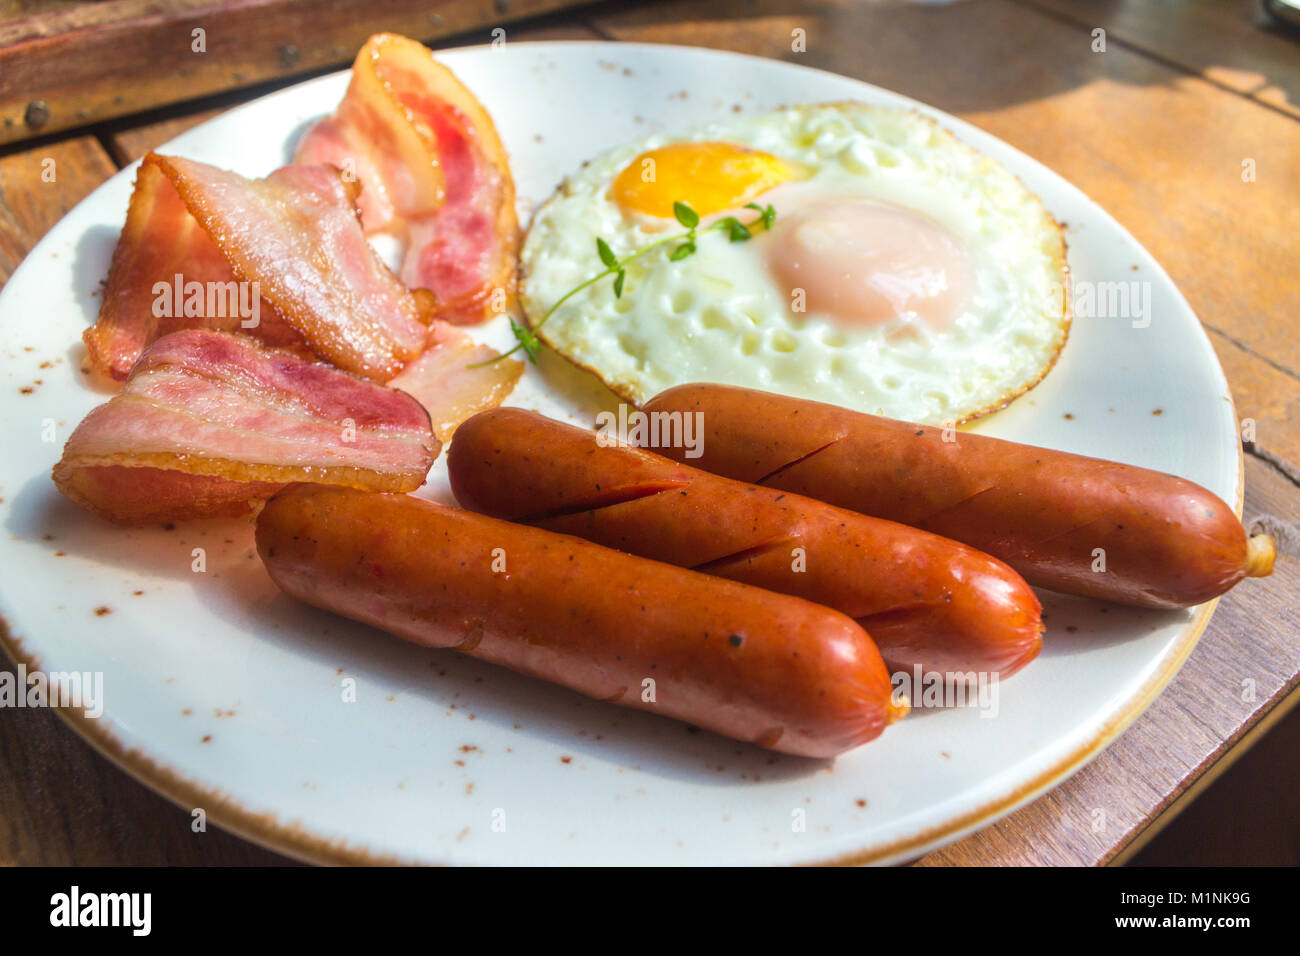 Set of american breakfast with bacon, fried eggs and sausage on wood table background Stock Photo